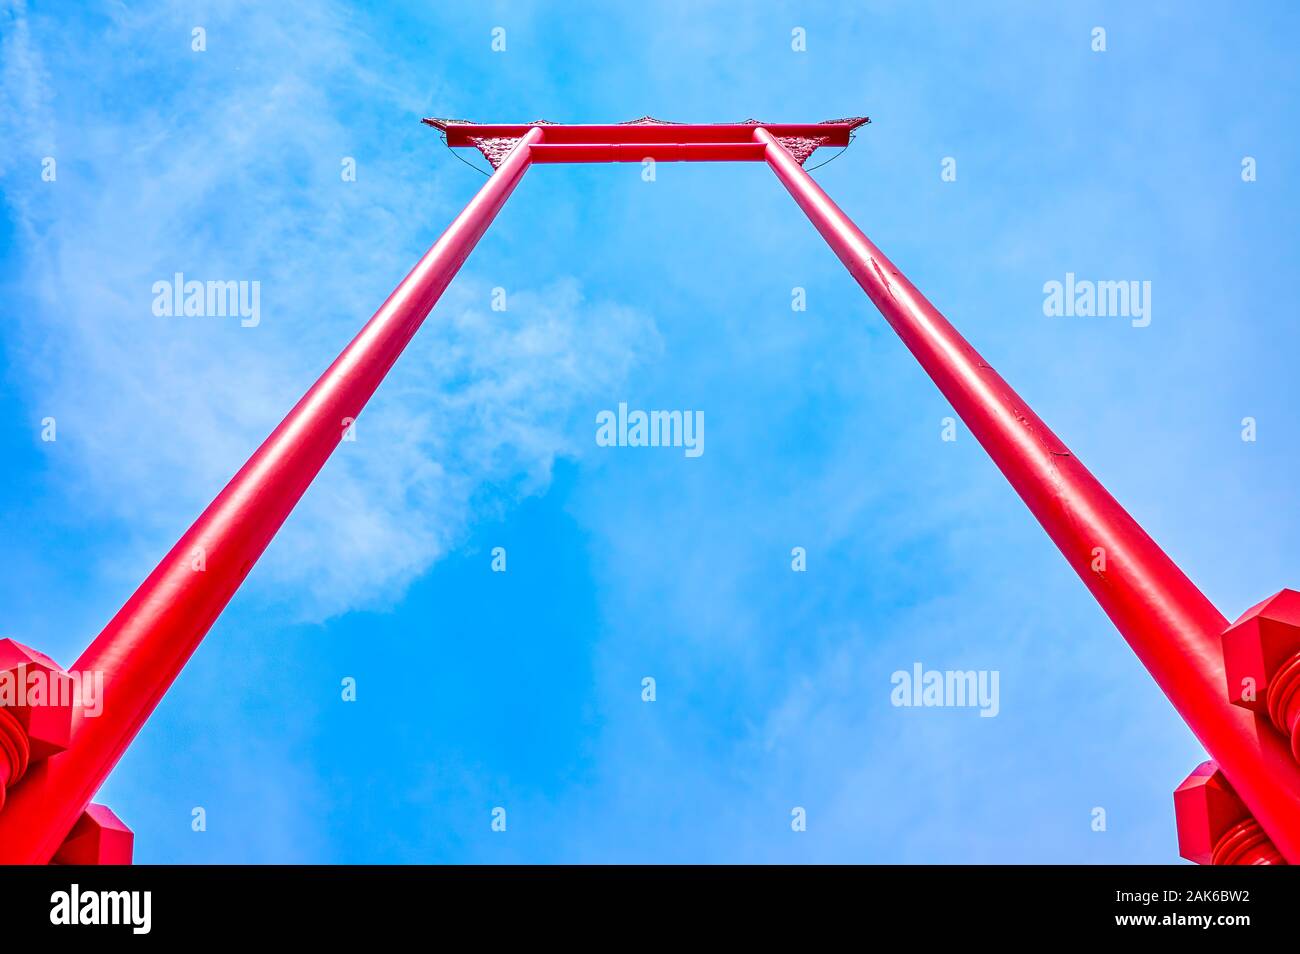 The amazing red timber Giant Swing is one of the most famous landmarks of Bangkok, Thailand Stock Photo